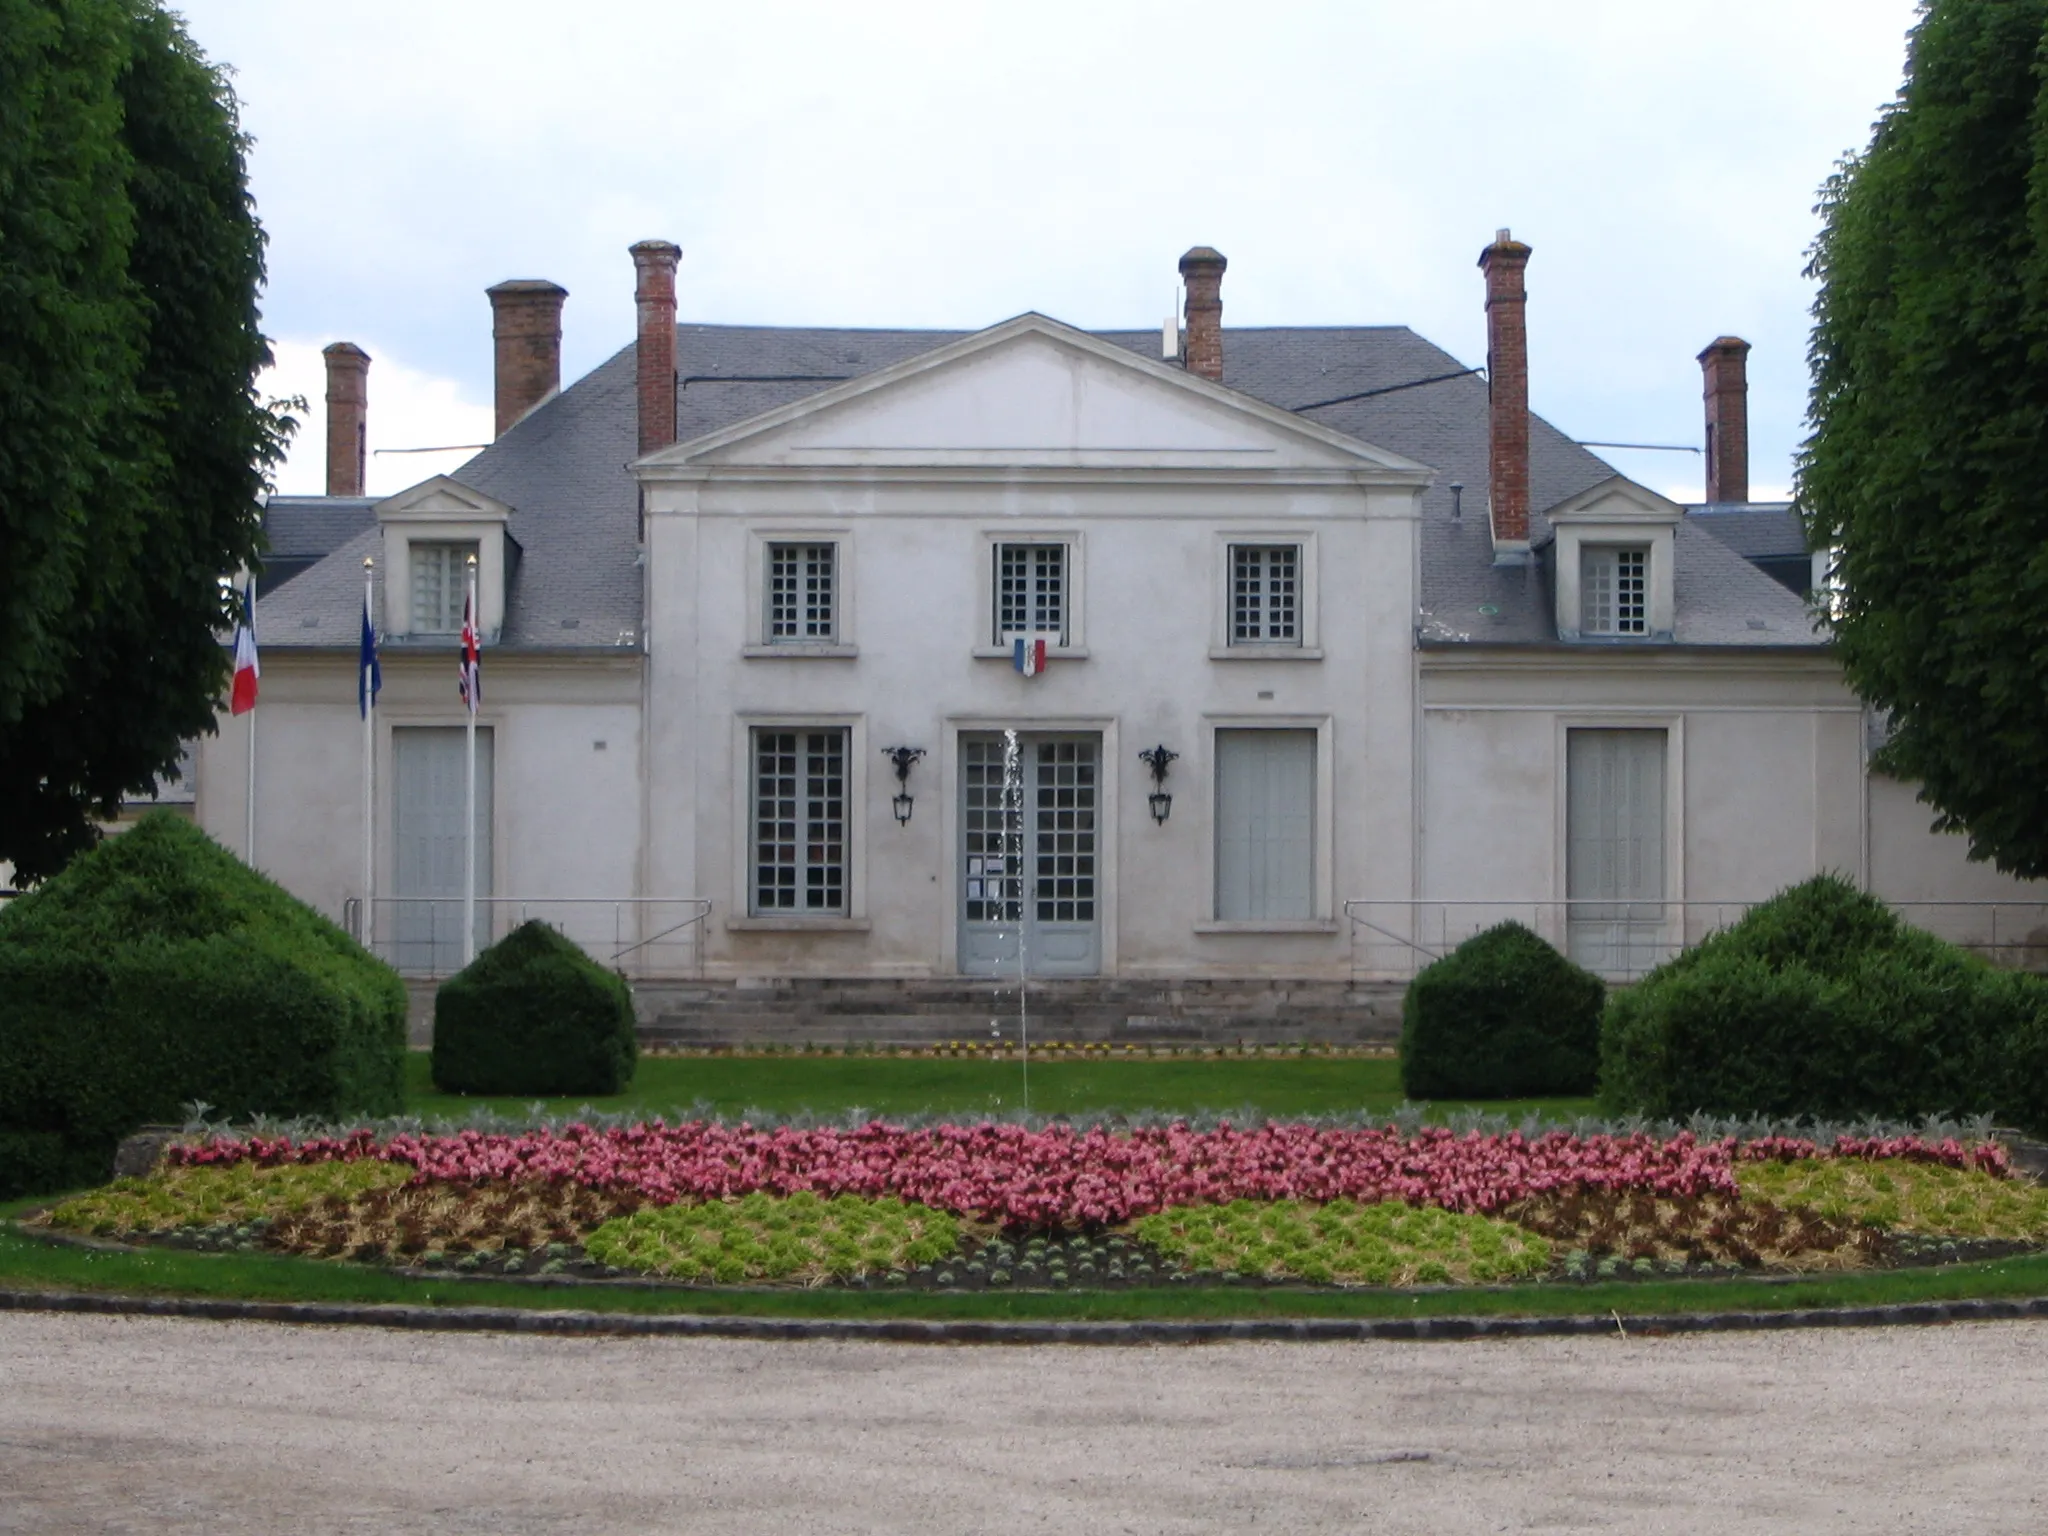 Photo showing: The town hall of Héricy, Seine-et-Marne, France.